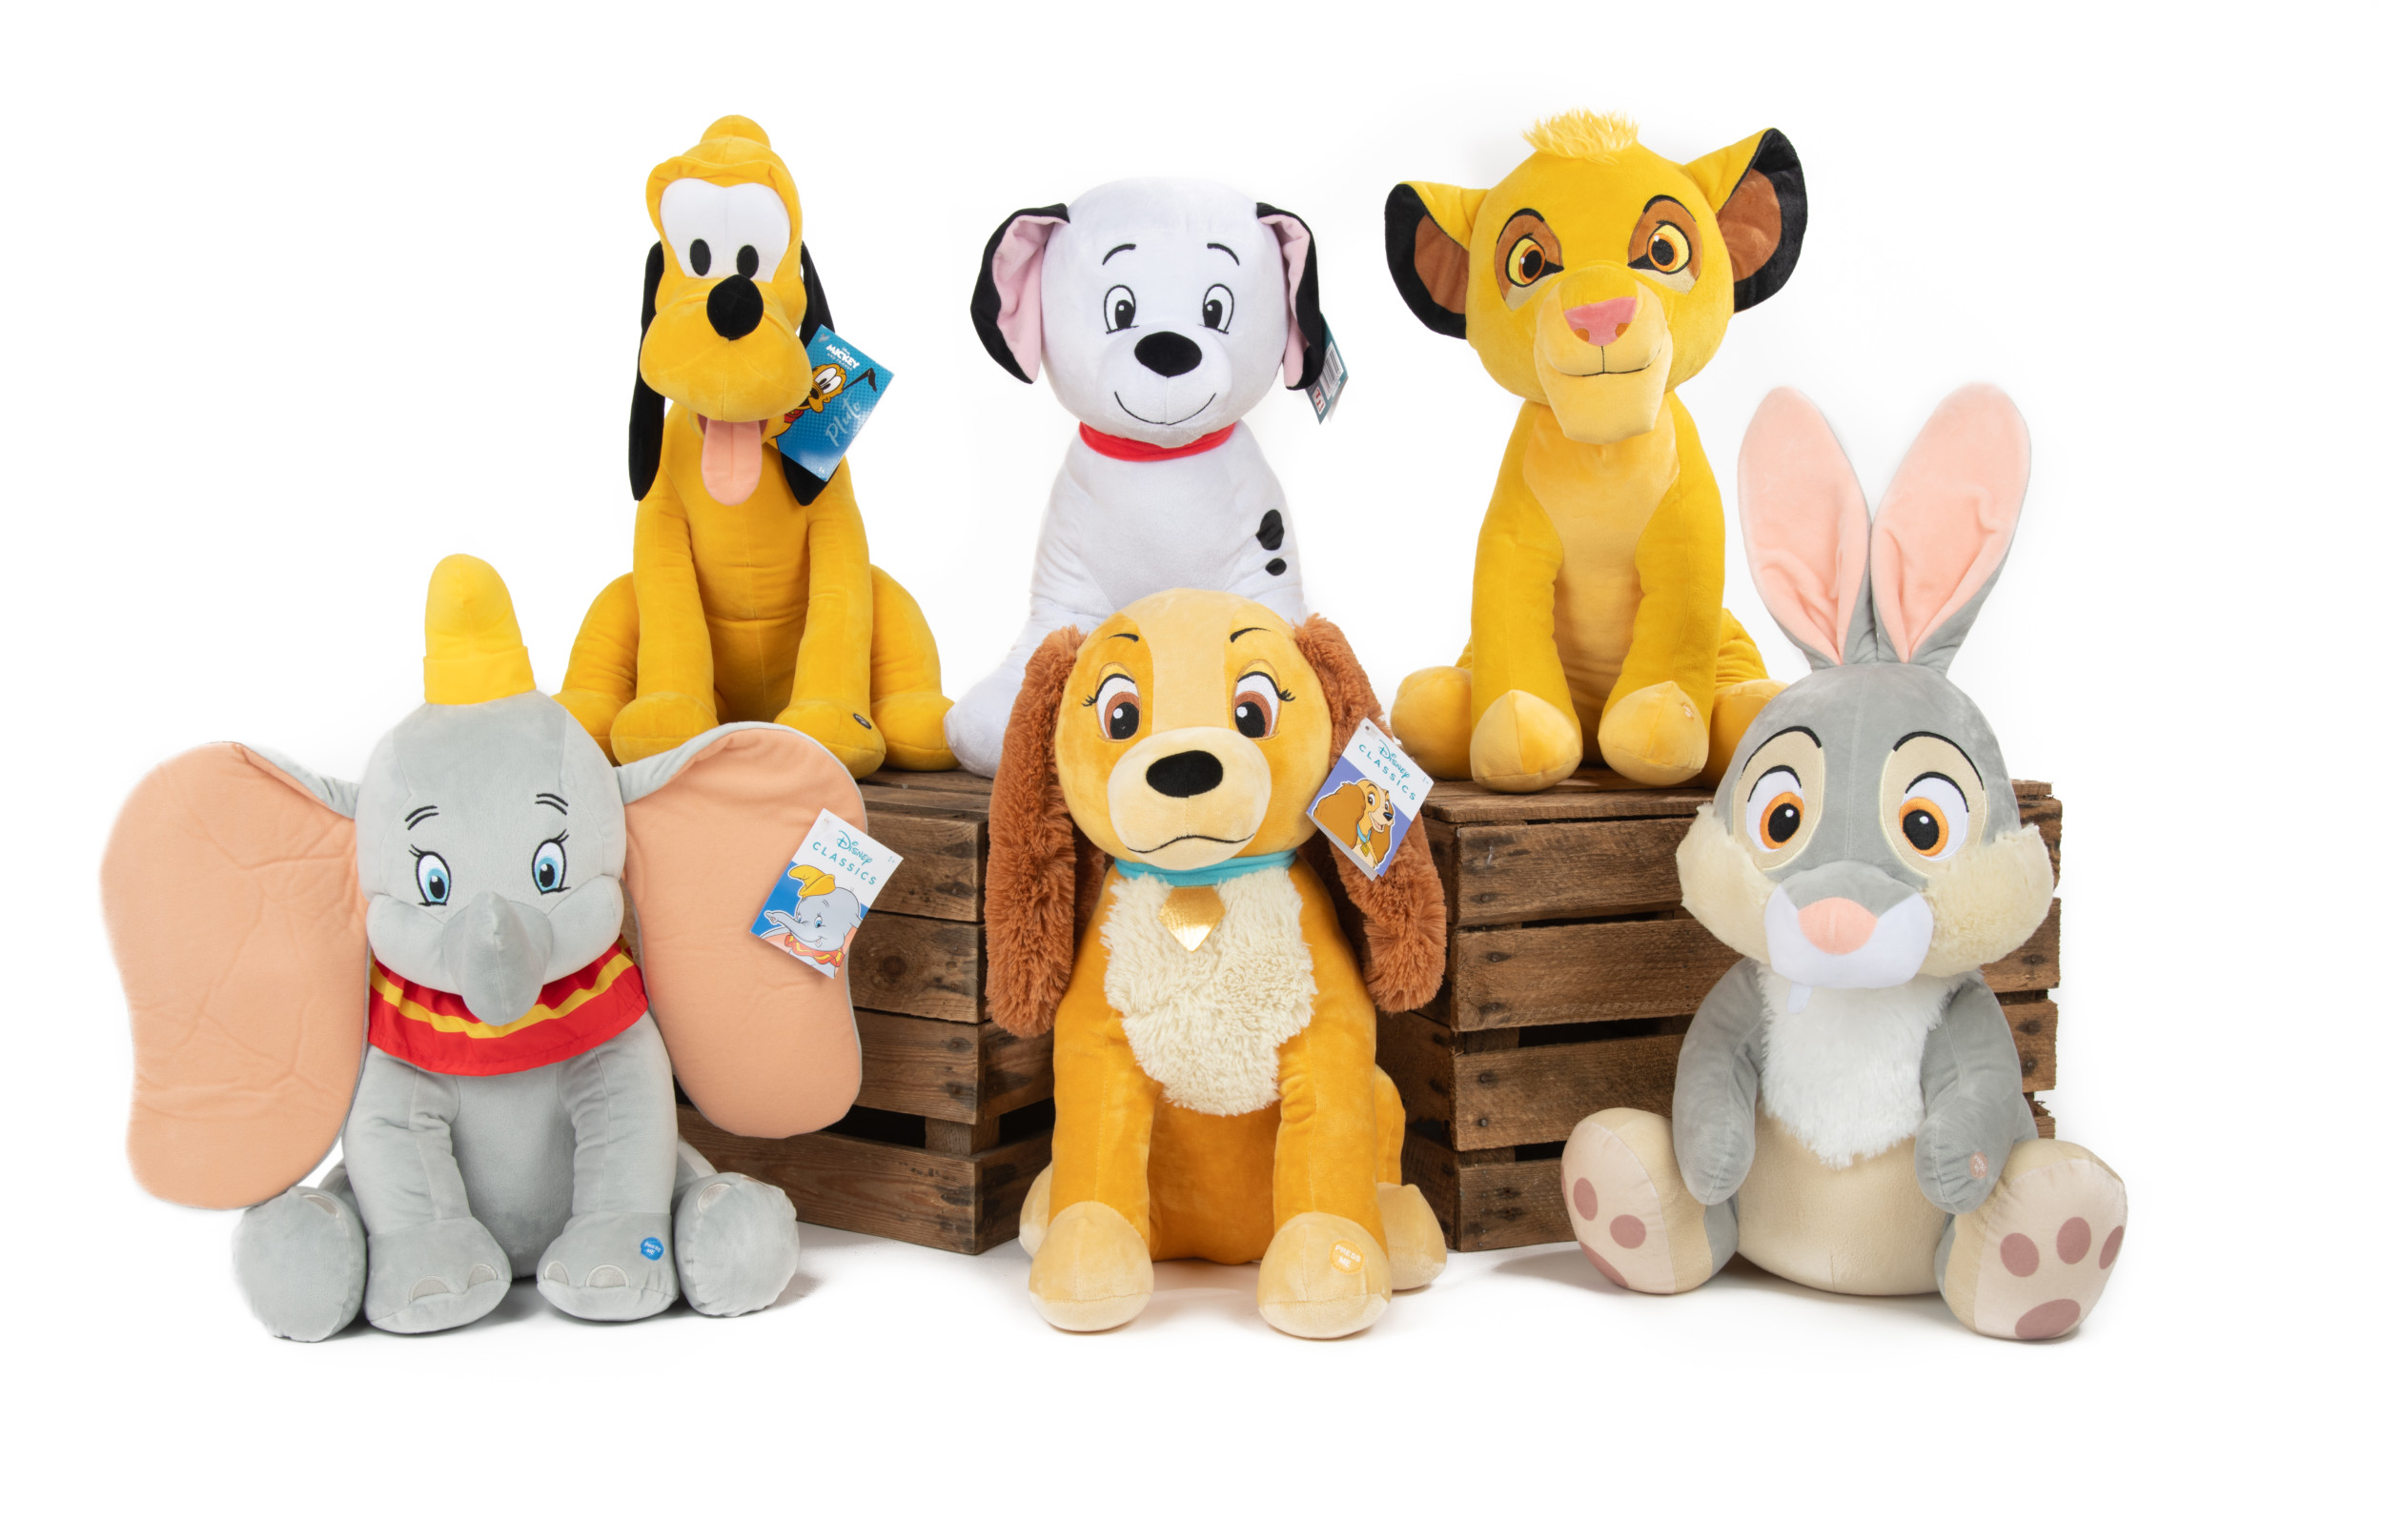 Sambro swaps to fully recycled filling across all plush toys -Toy World  Magazine | The business magazine with a passion for toys